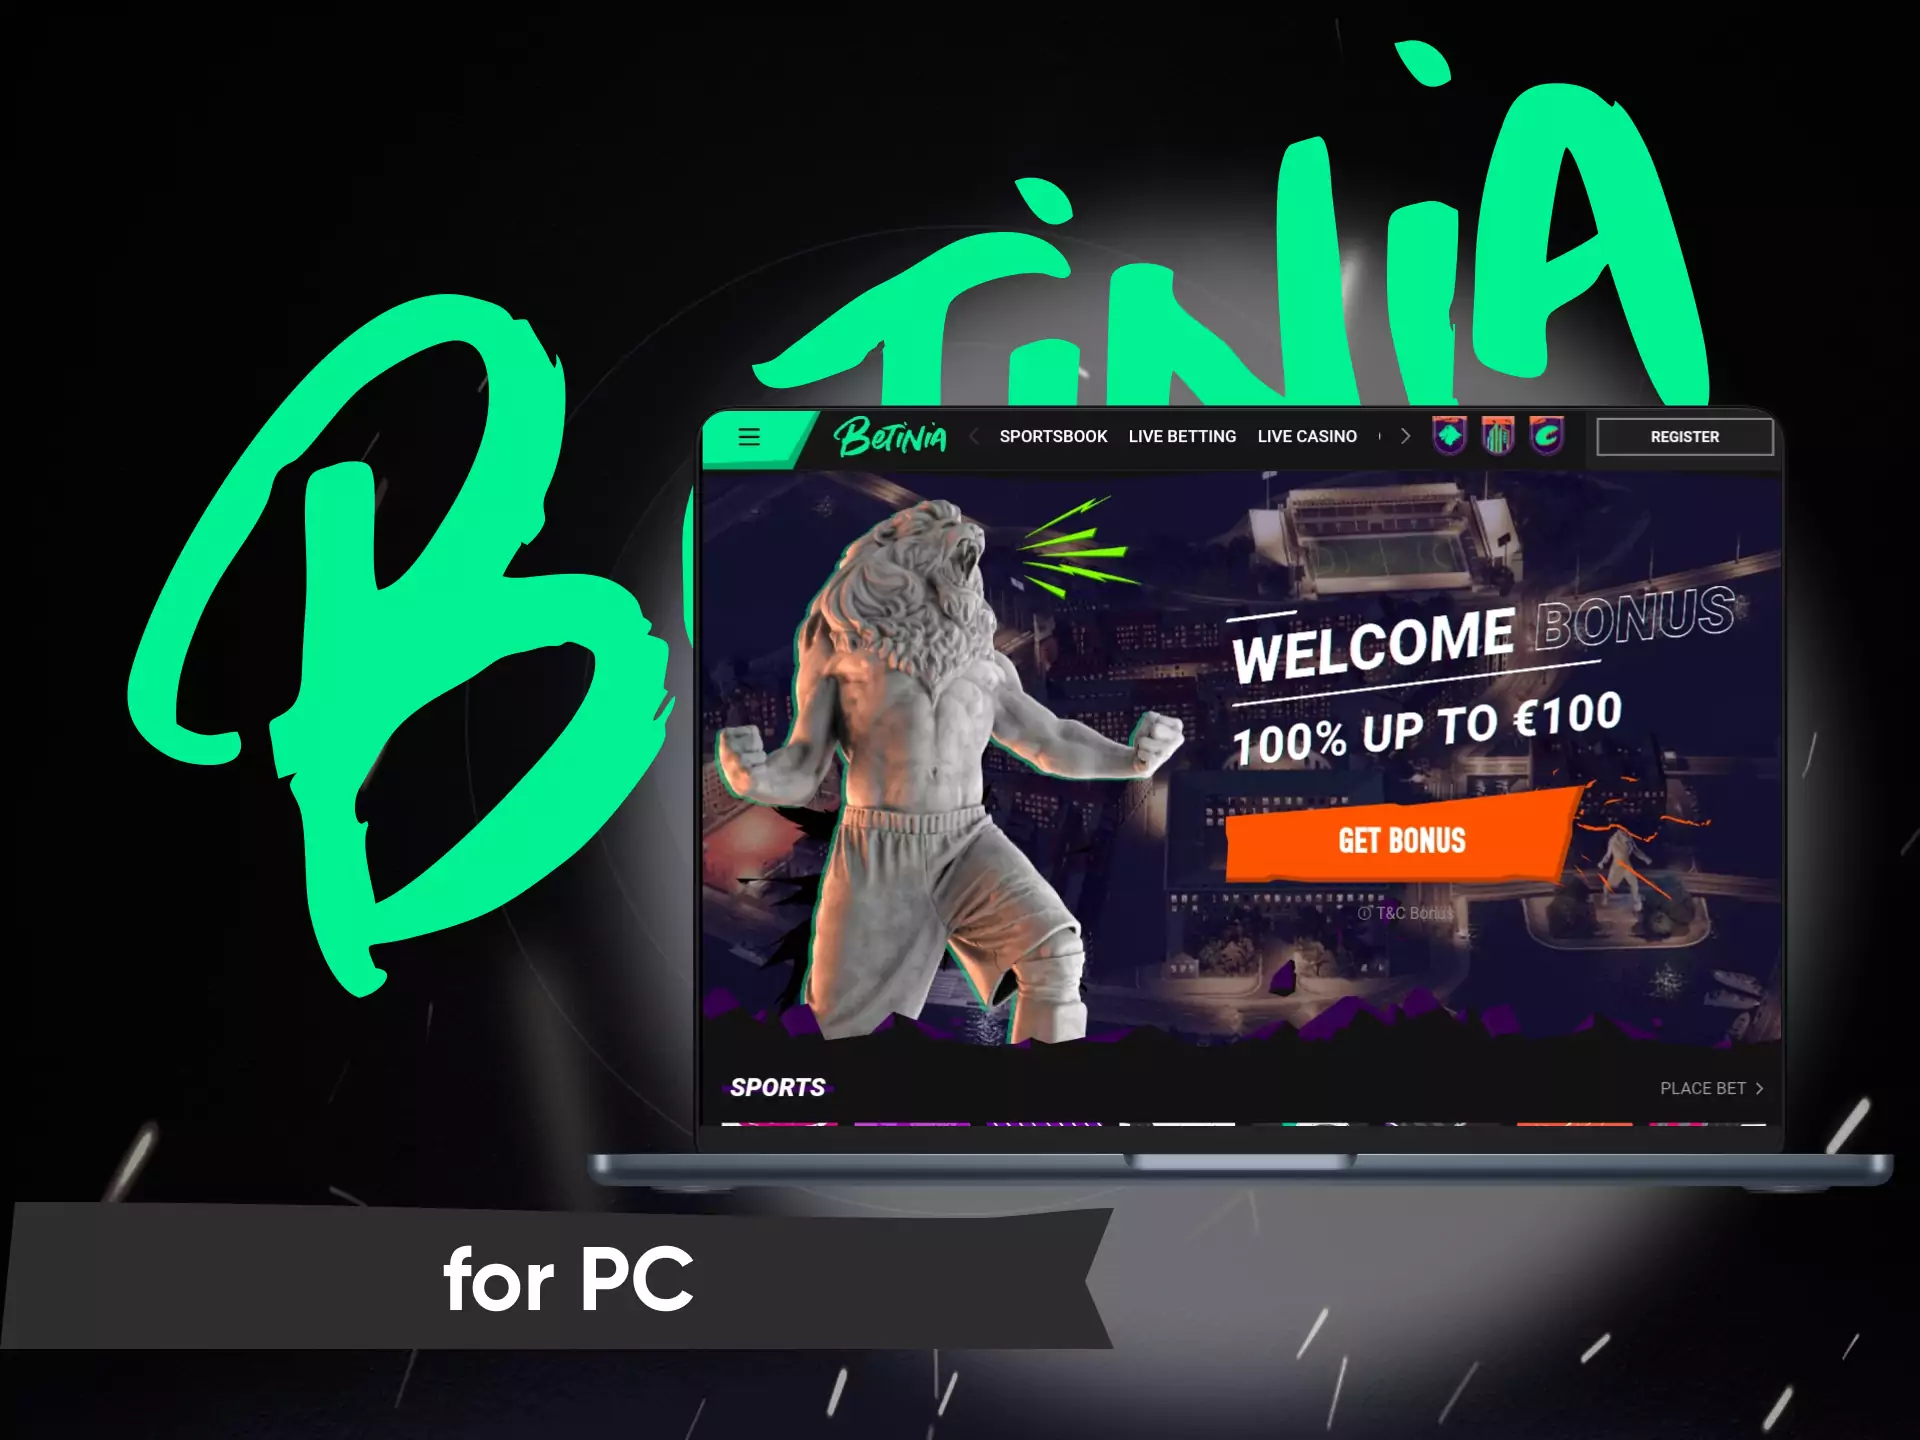 Since there is no PC client for Betinia, you should use the website version.